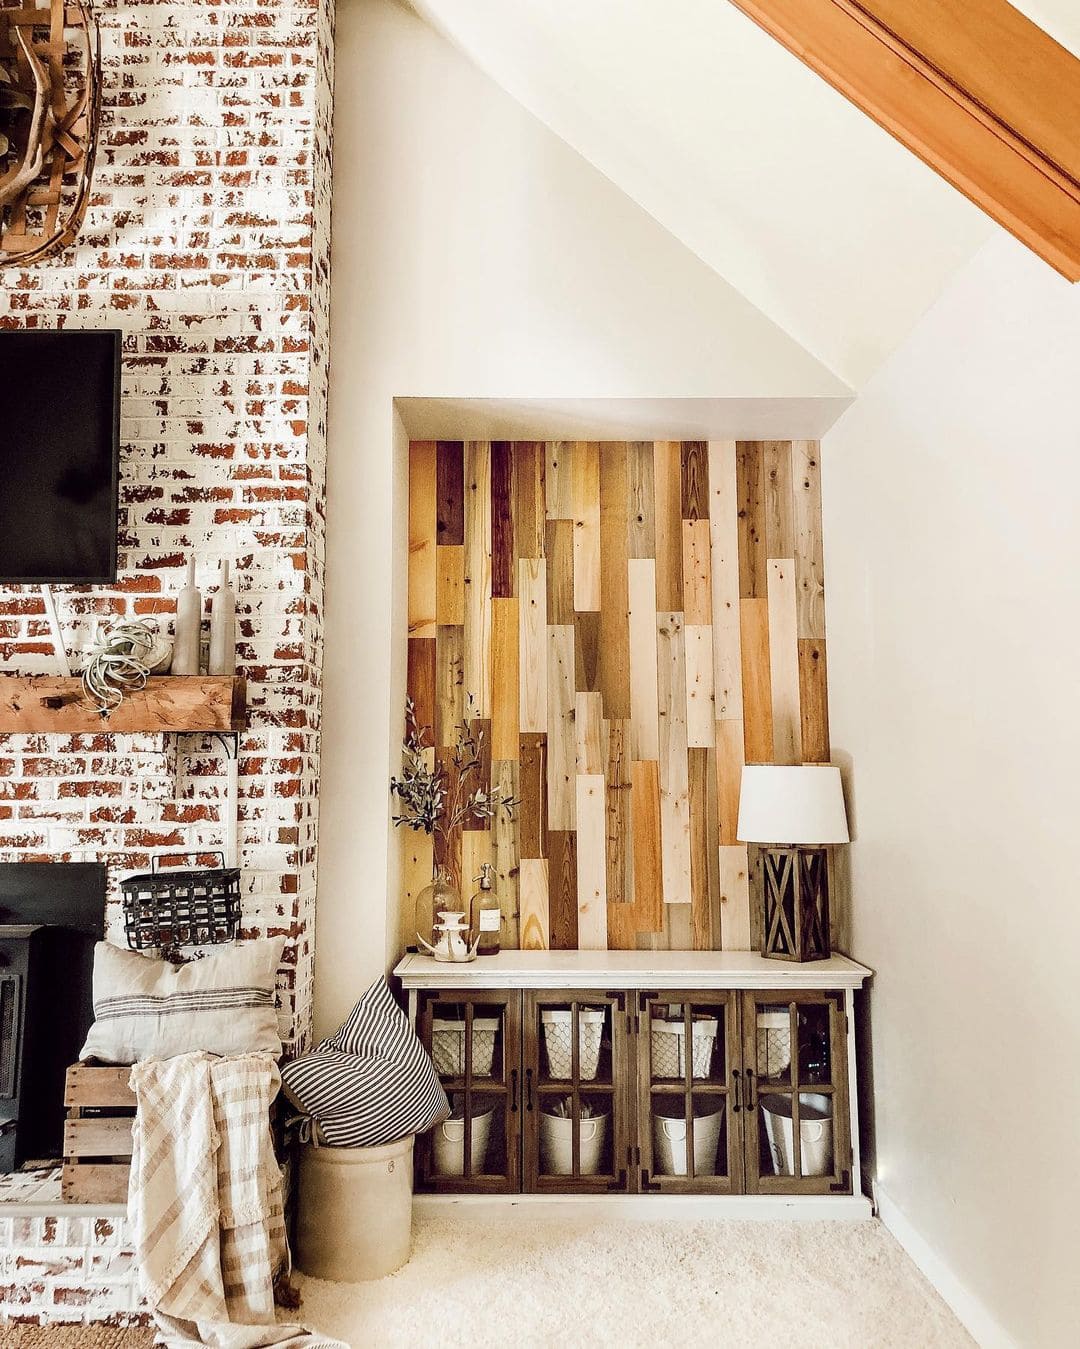 Wooden Accent Wall: Add A Touch Of Nature To Your Home